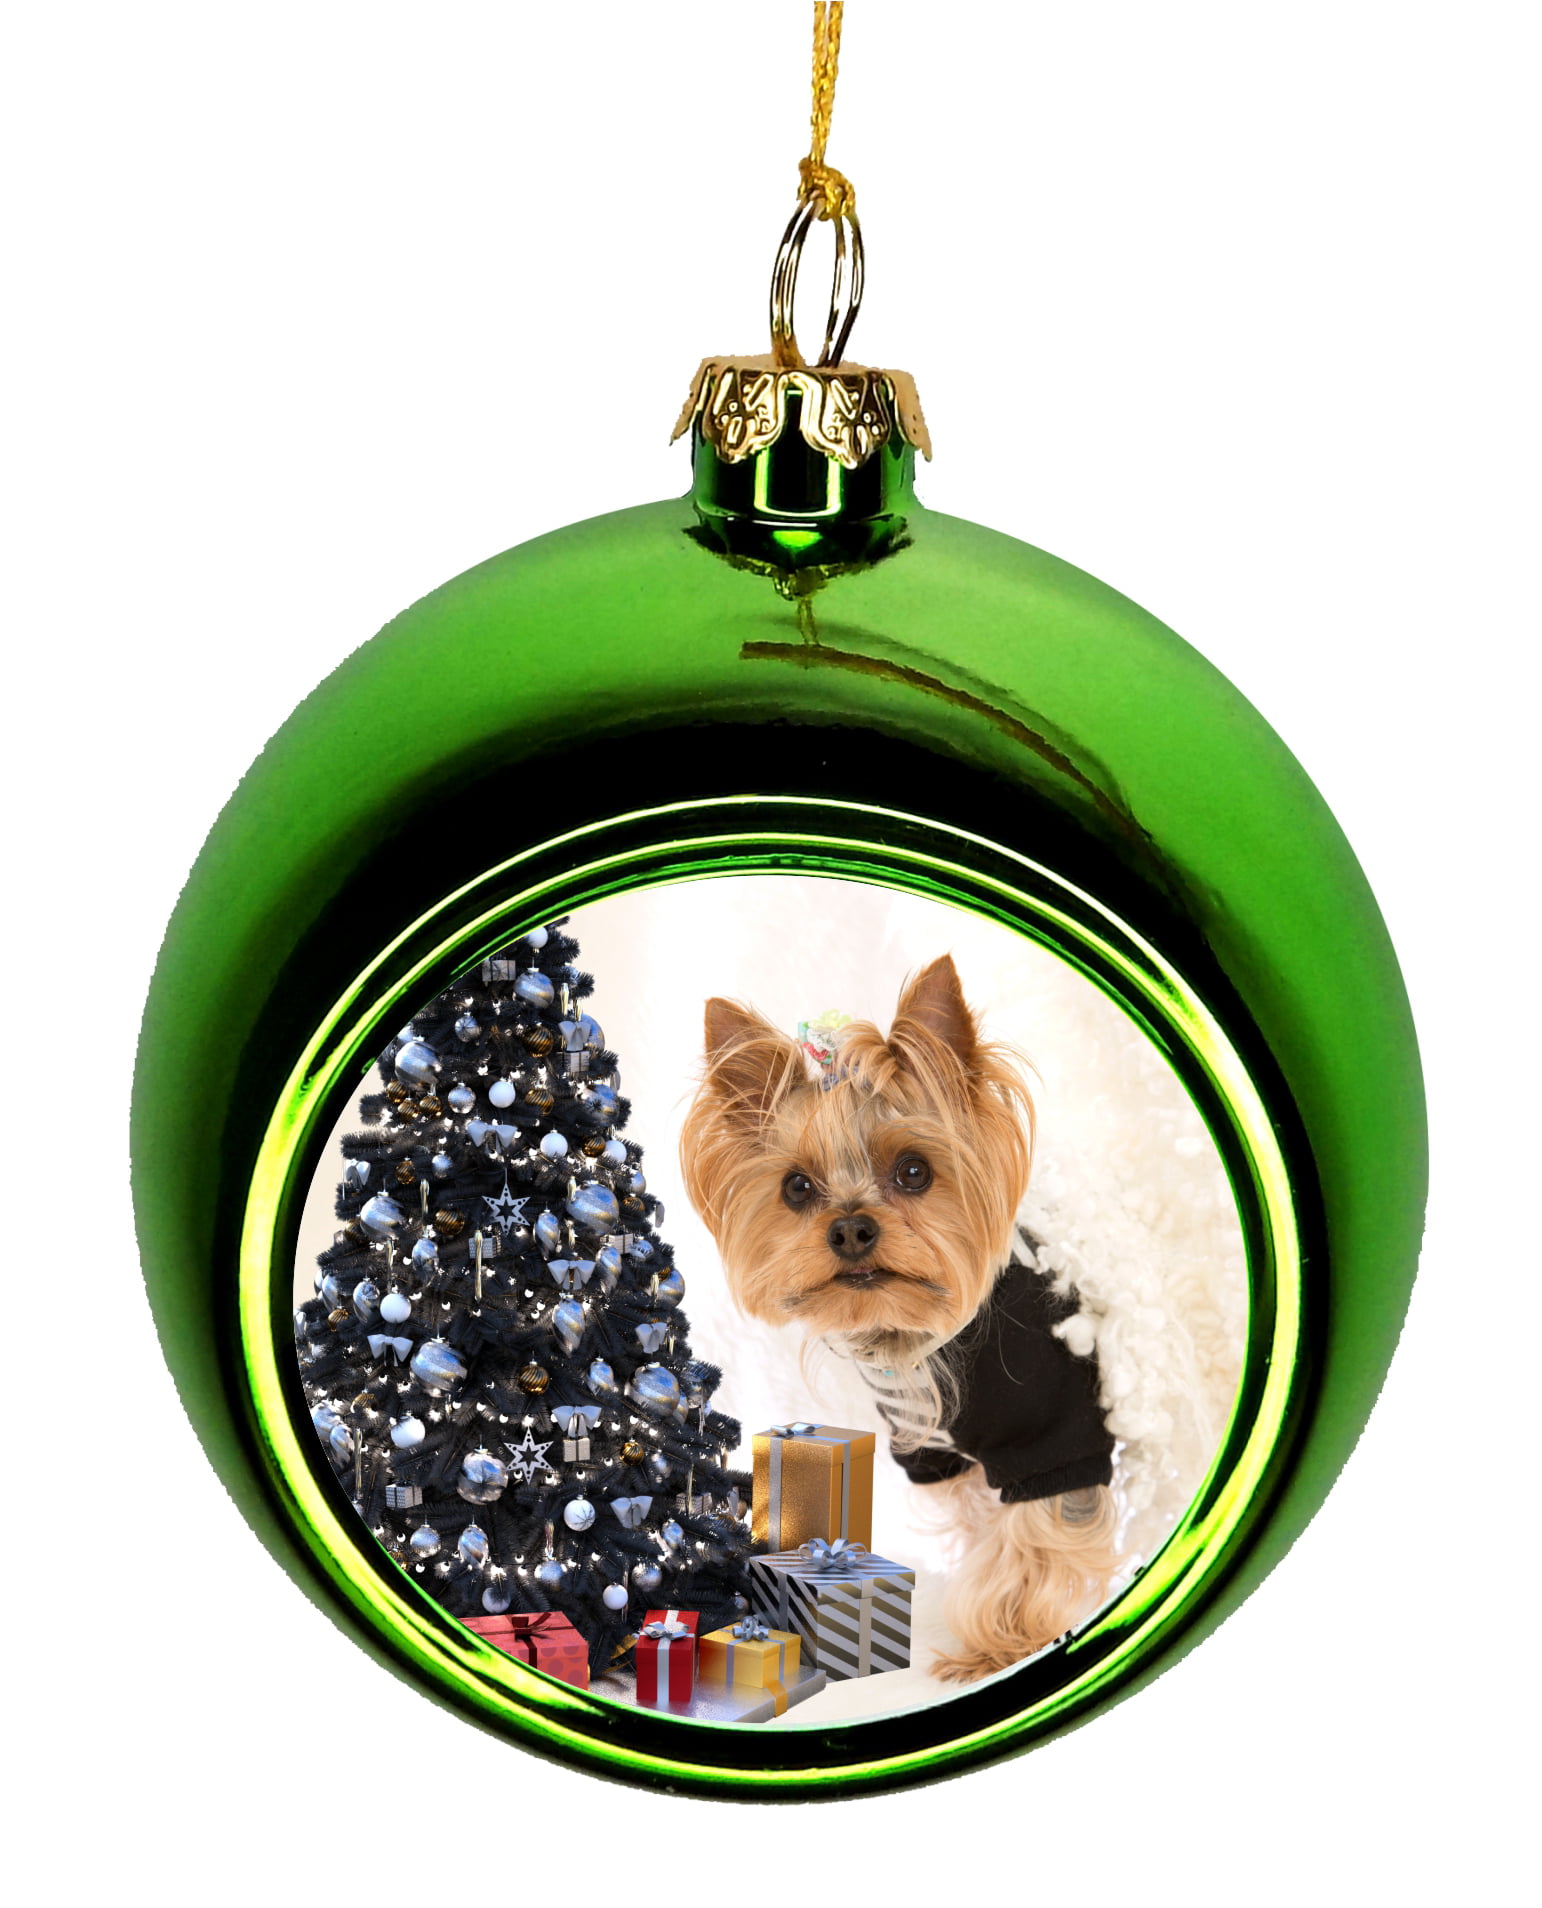 Yorkie Shatter Proof Ball Ornament Dog Holiday Gift Christmas Tree Decoration 